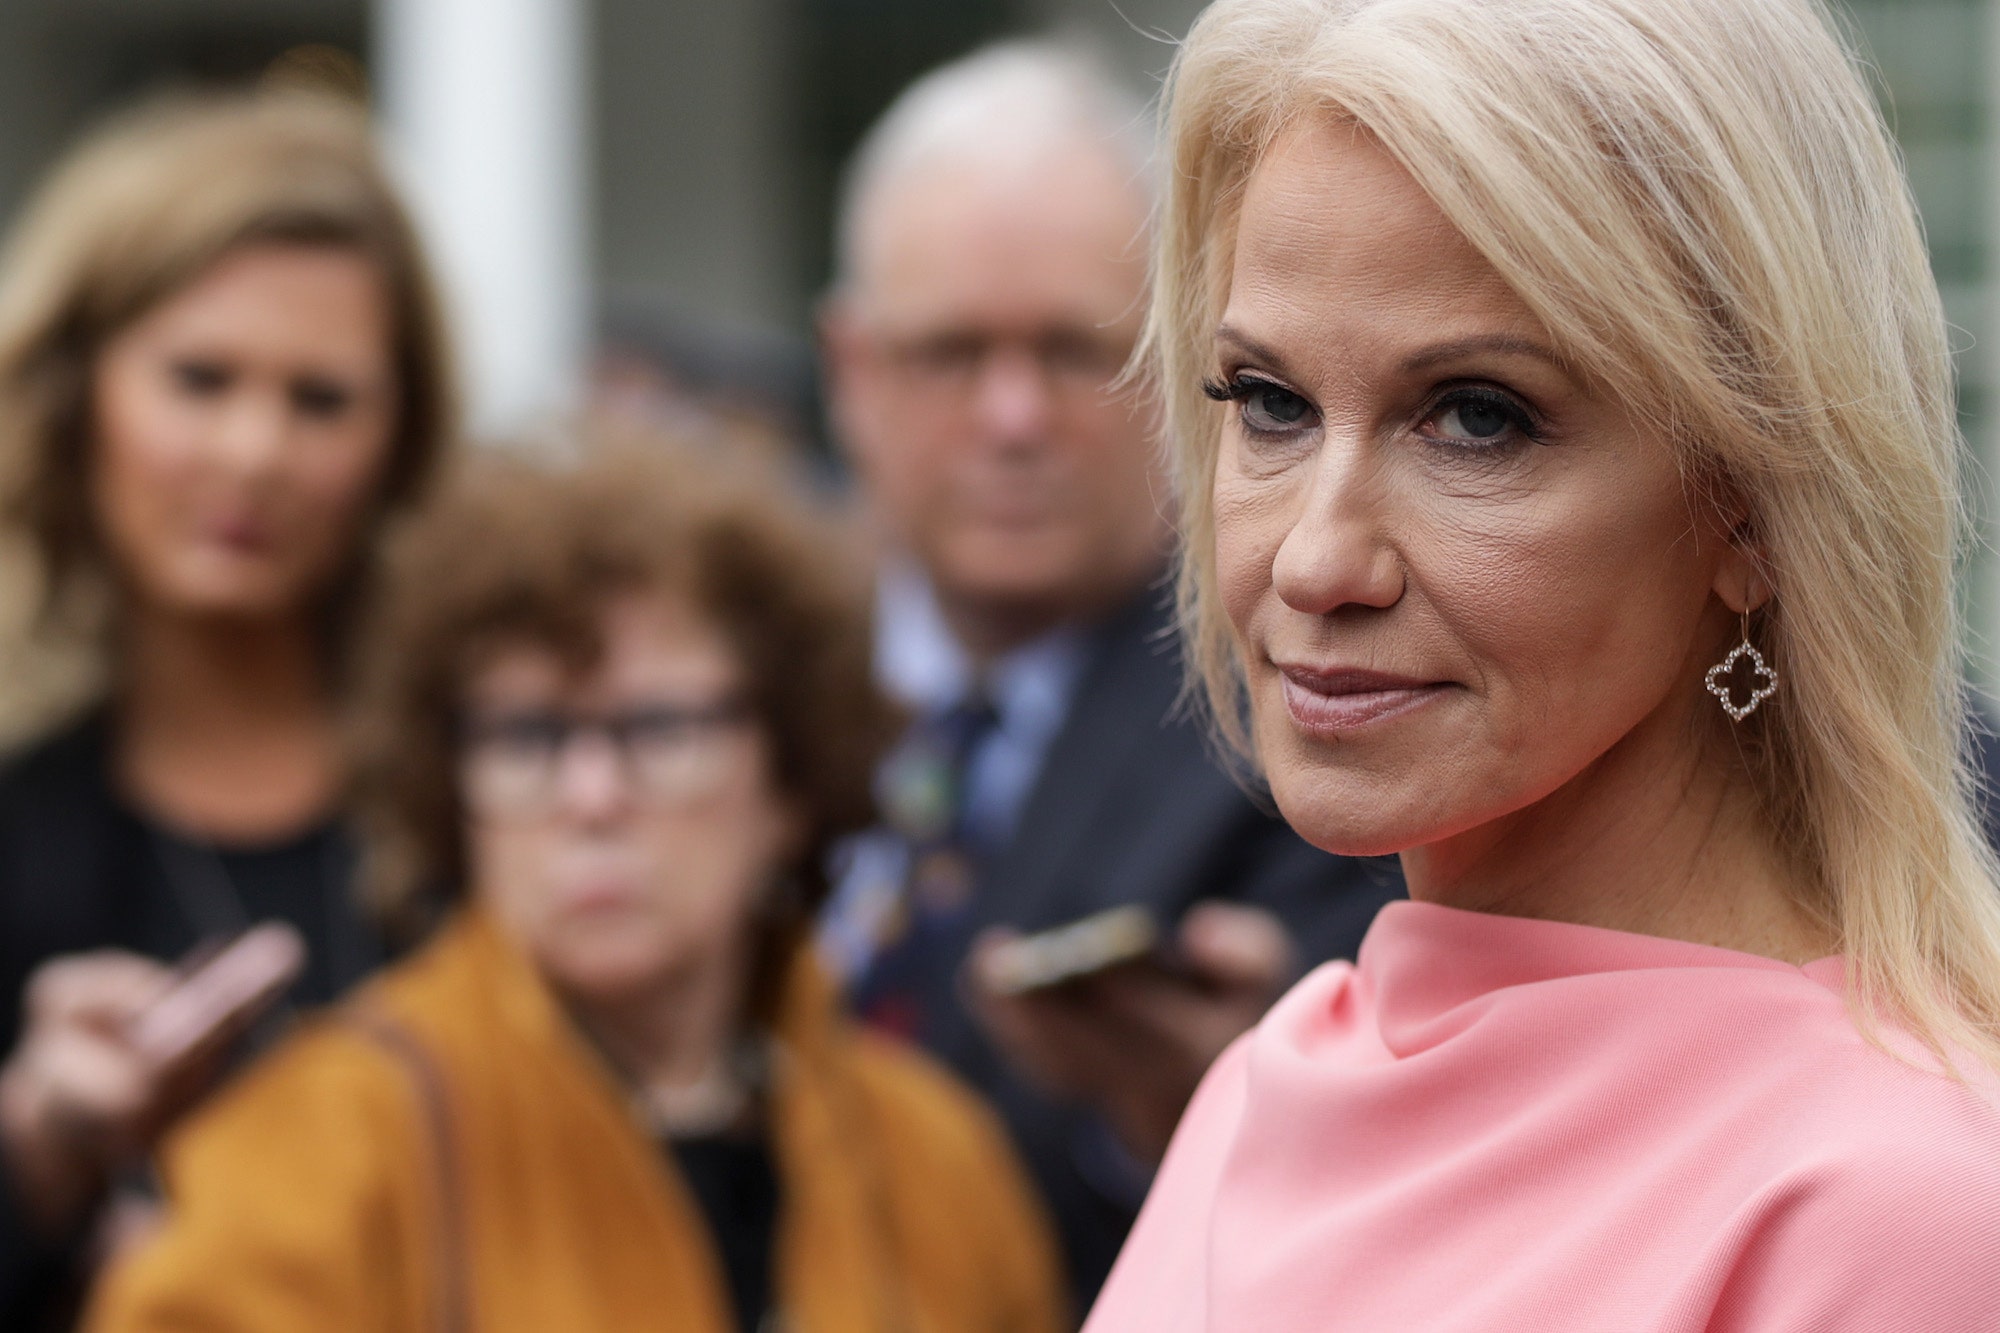 What Plastic Surgery Has Kellyanne Conway Gotten? Body Measurements and Wiki